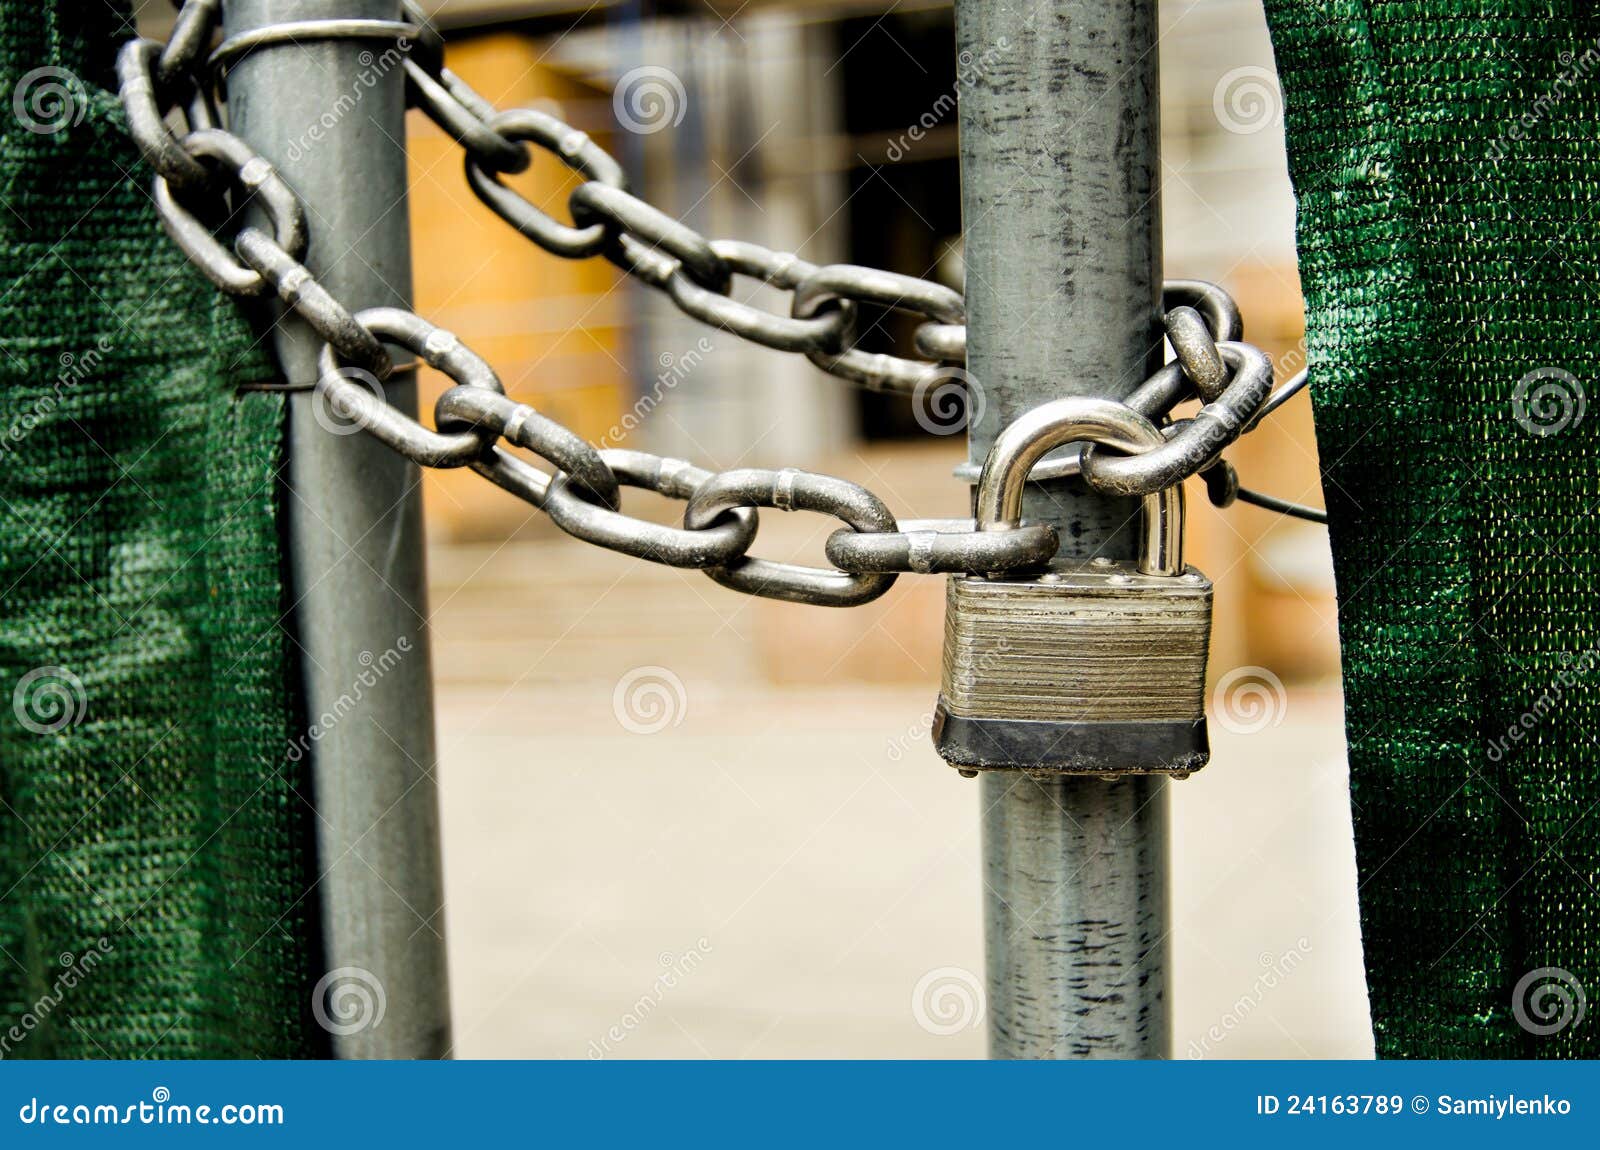 Lock And Chain On Gate Royalty Free Stock Images - Image: 24163789